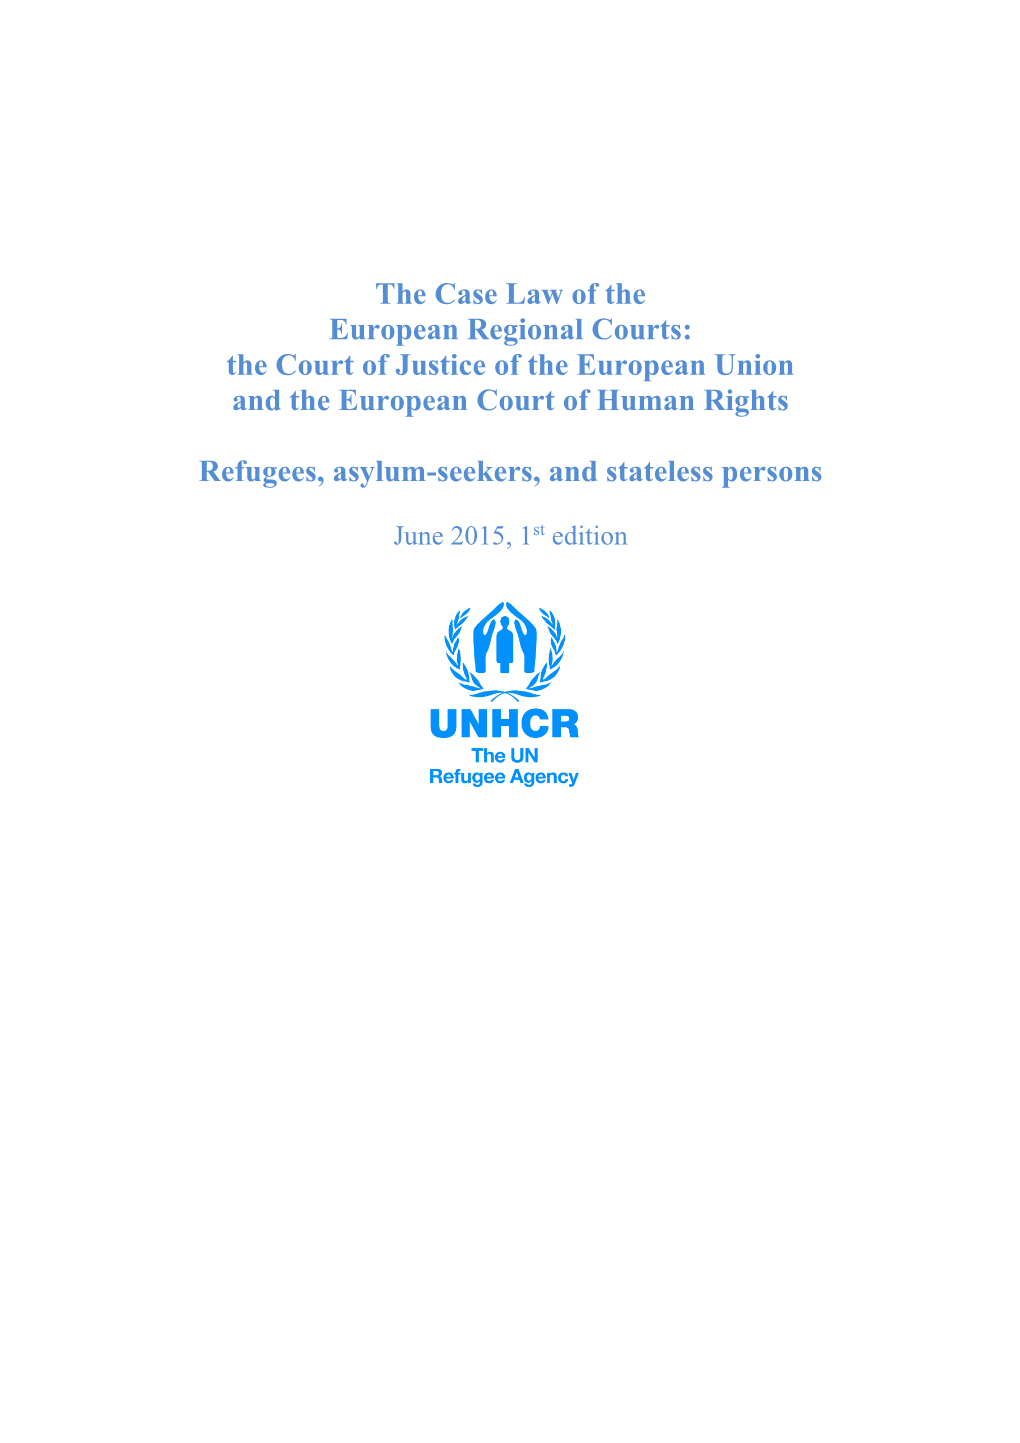 The Court of Justice of the European Union and the European Court of Human Rights